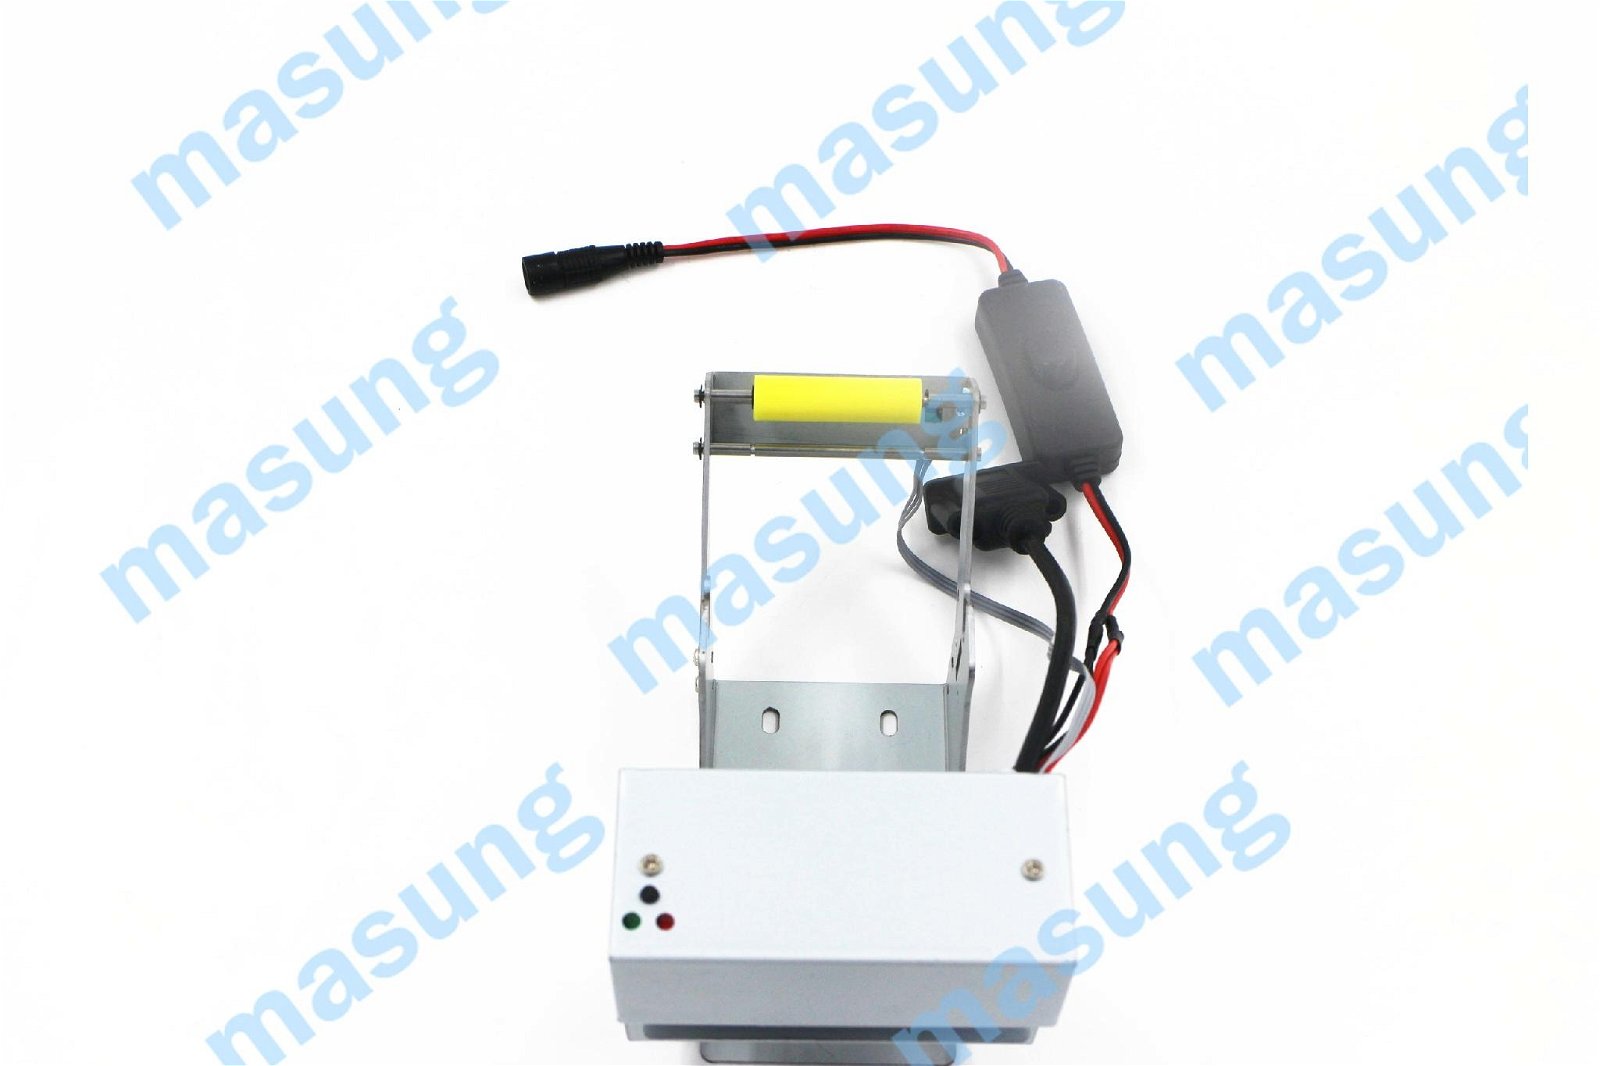 2inch supermarket kiosk printer with last ticket detection function 4